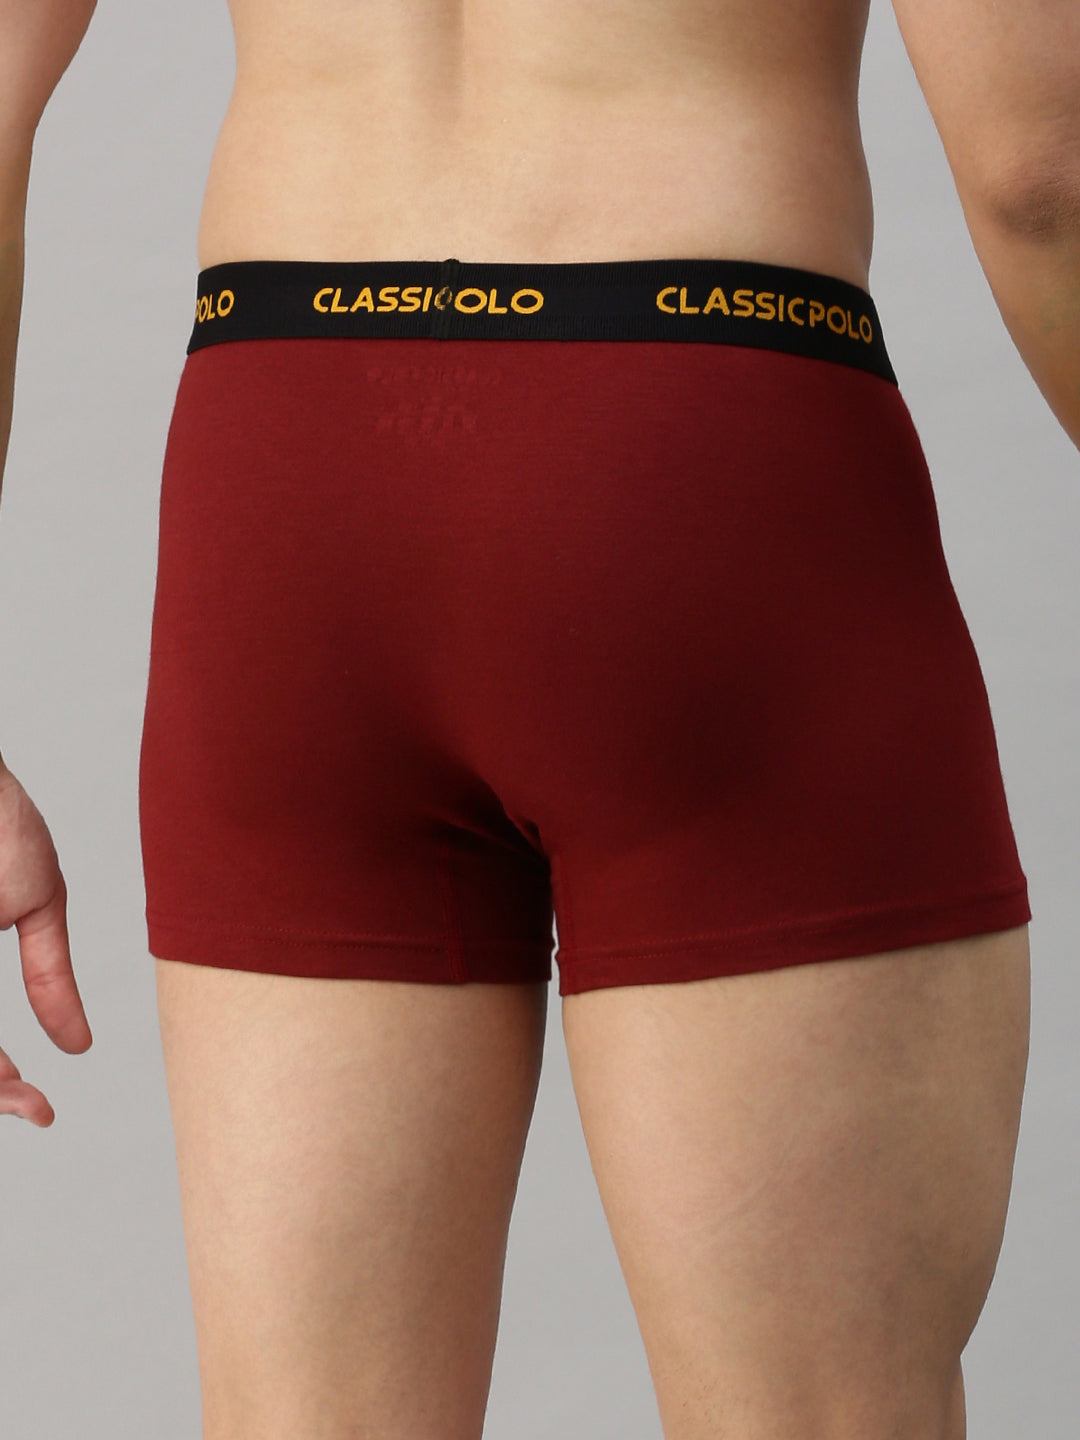 Classic Polo Men's Modal Solid Trunk | Glance - Maroon